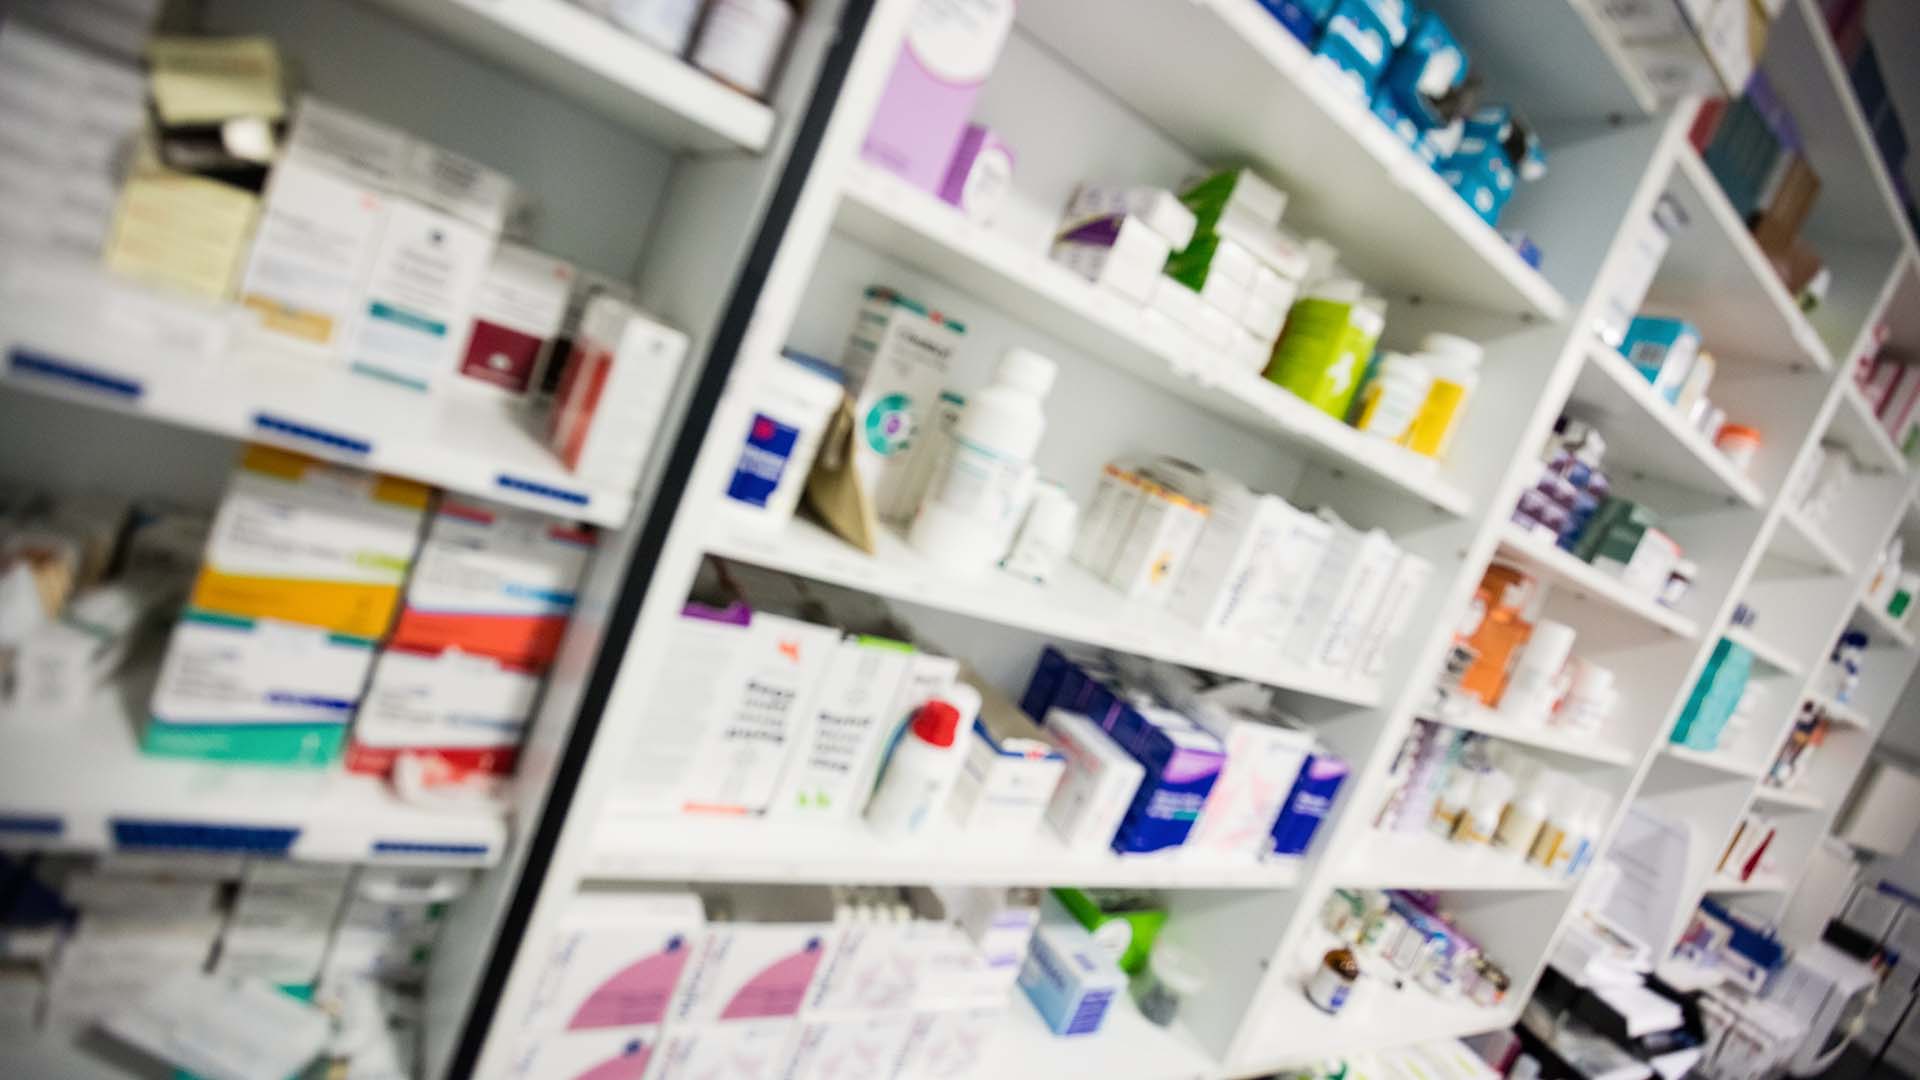 Pharmacy shelving with medication boxes and bottles